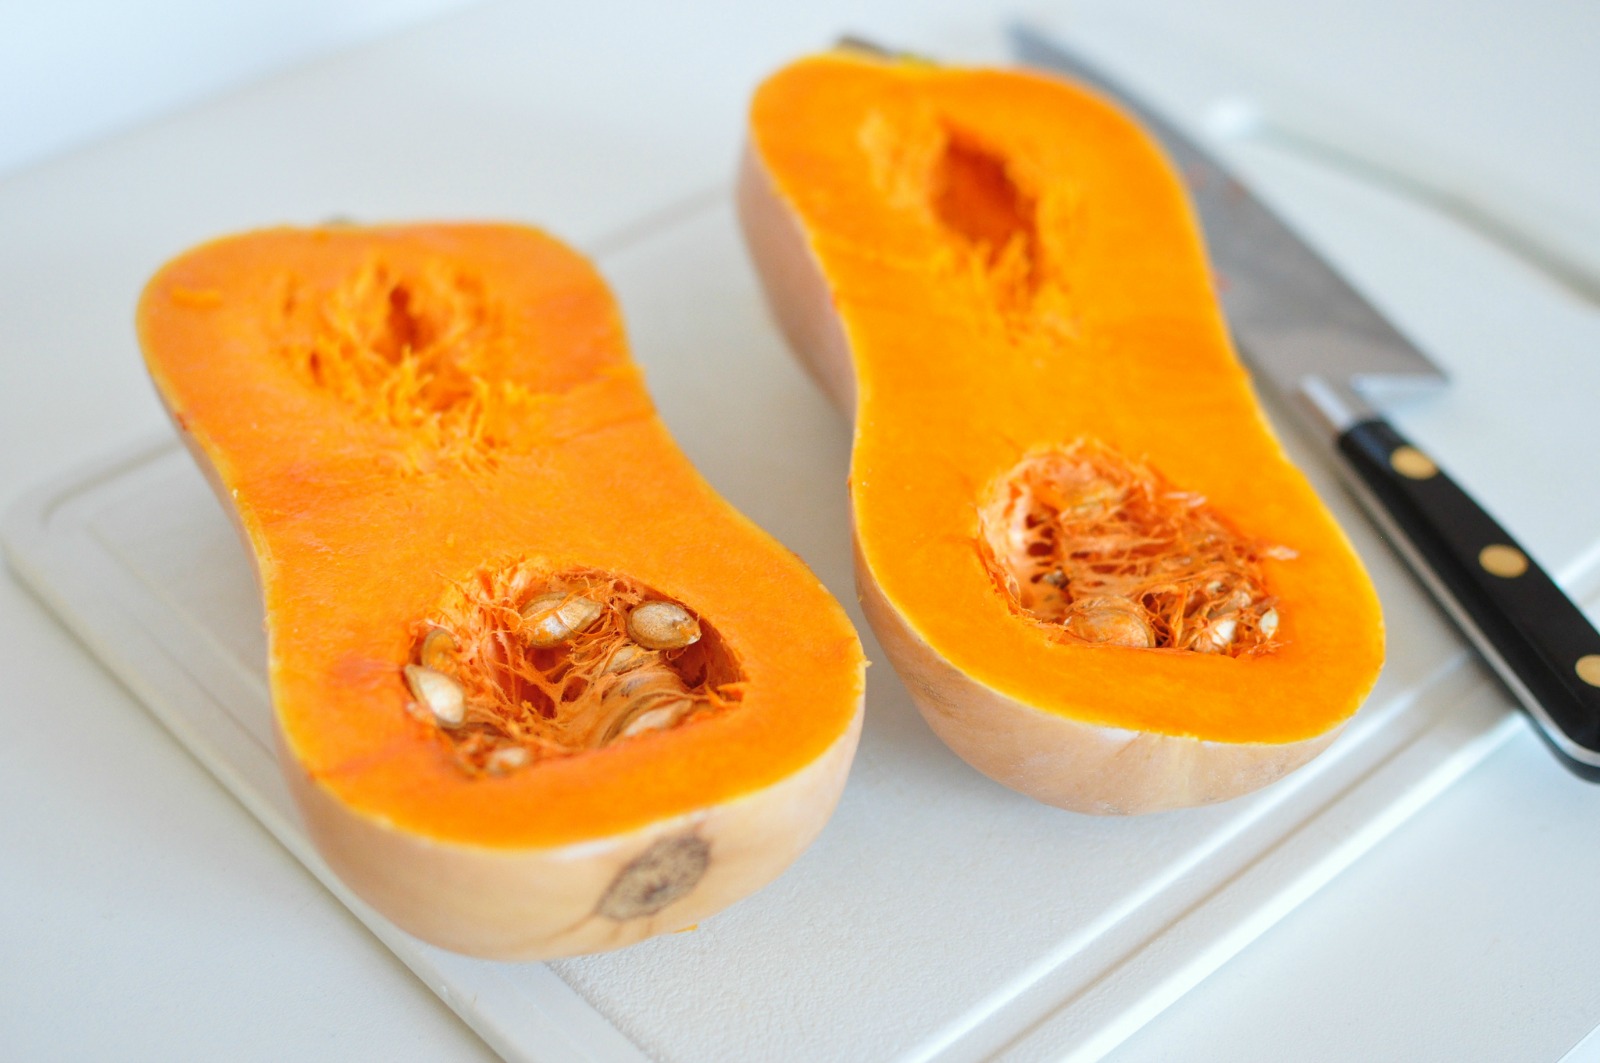 what happens if you eat spoiled butternut squash?